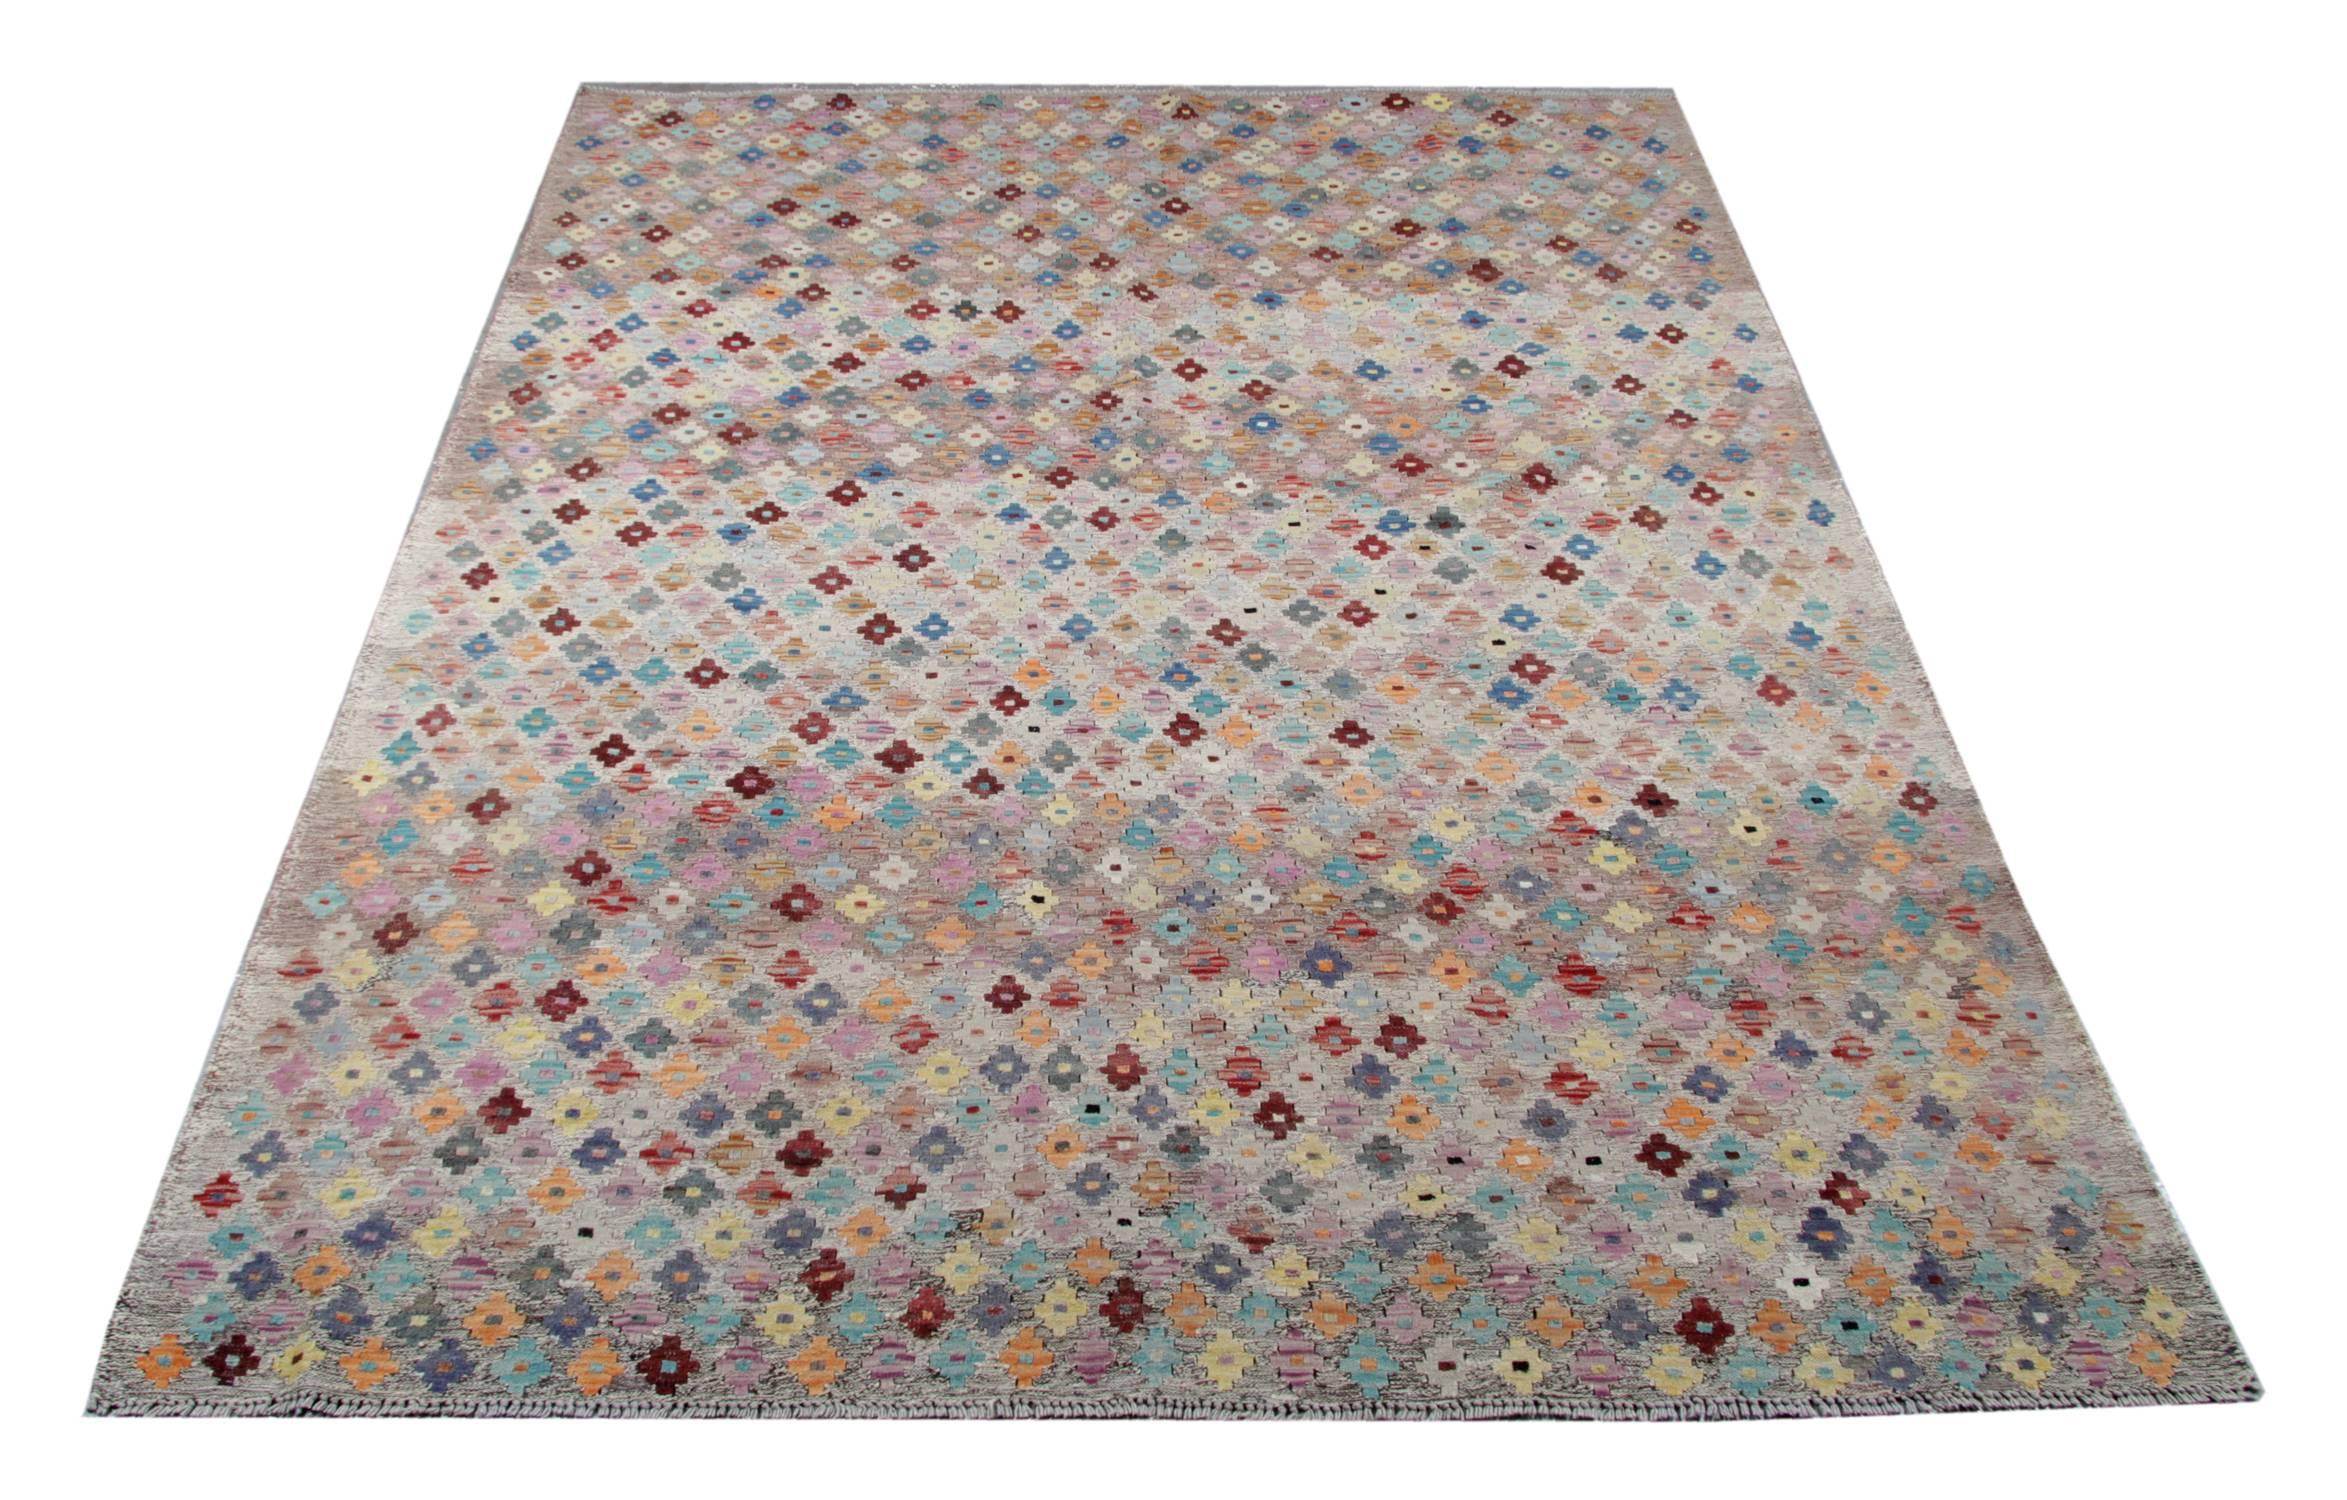 This is an example of a flat-weave rug woven by highly skilled weavers in Afghanistan. These large luxury rugs are made with finest quality wool and cotton. This grey rug shows ‘Abrash’ on its background colors and they beautifully create different